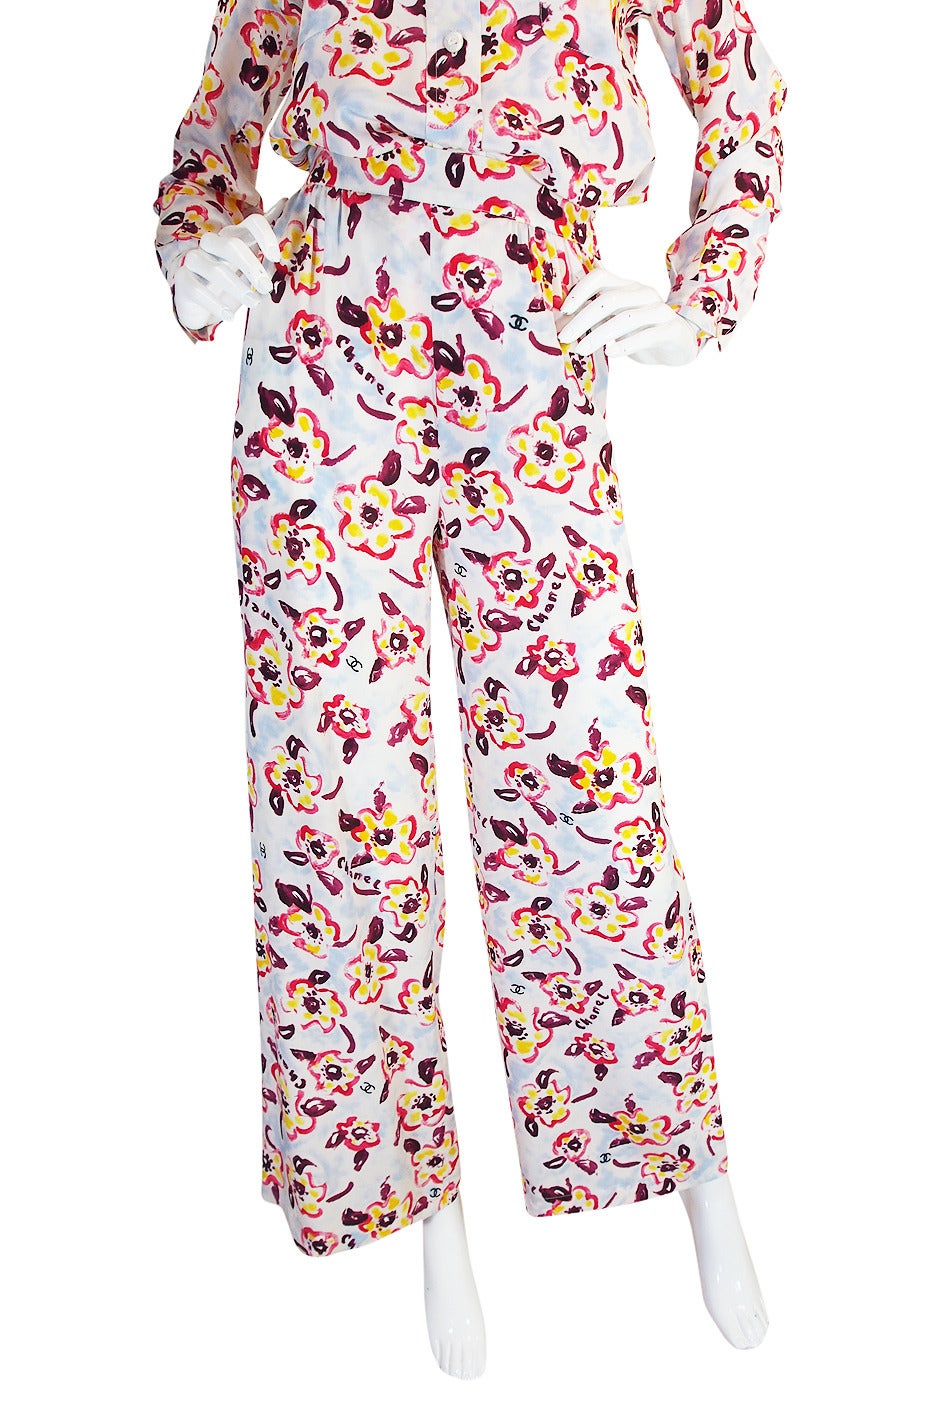 Resort 1996 Documented Chanel Silk Logo Pant Suit For Sale at 1stdibs